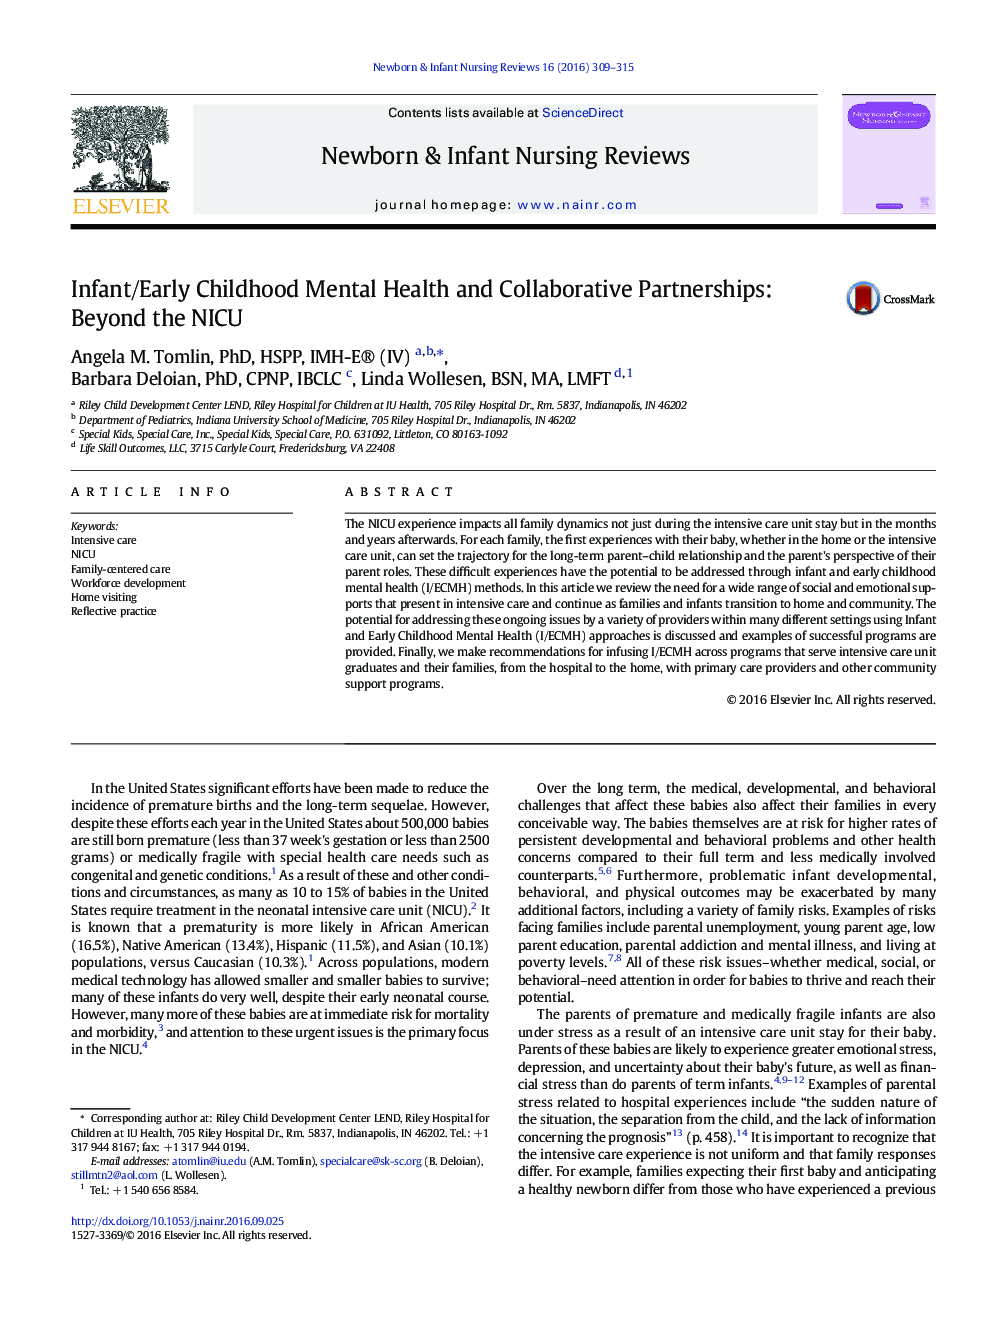 ArticleInfant/Early Childhood Mental Health and Collaborative Partnerships: Beyond the NICU